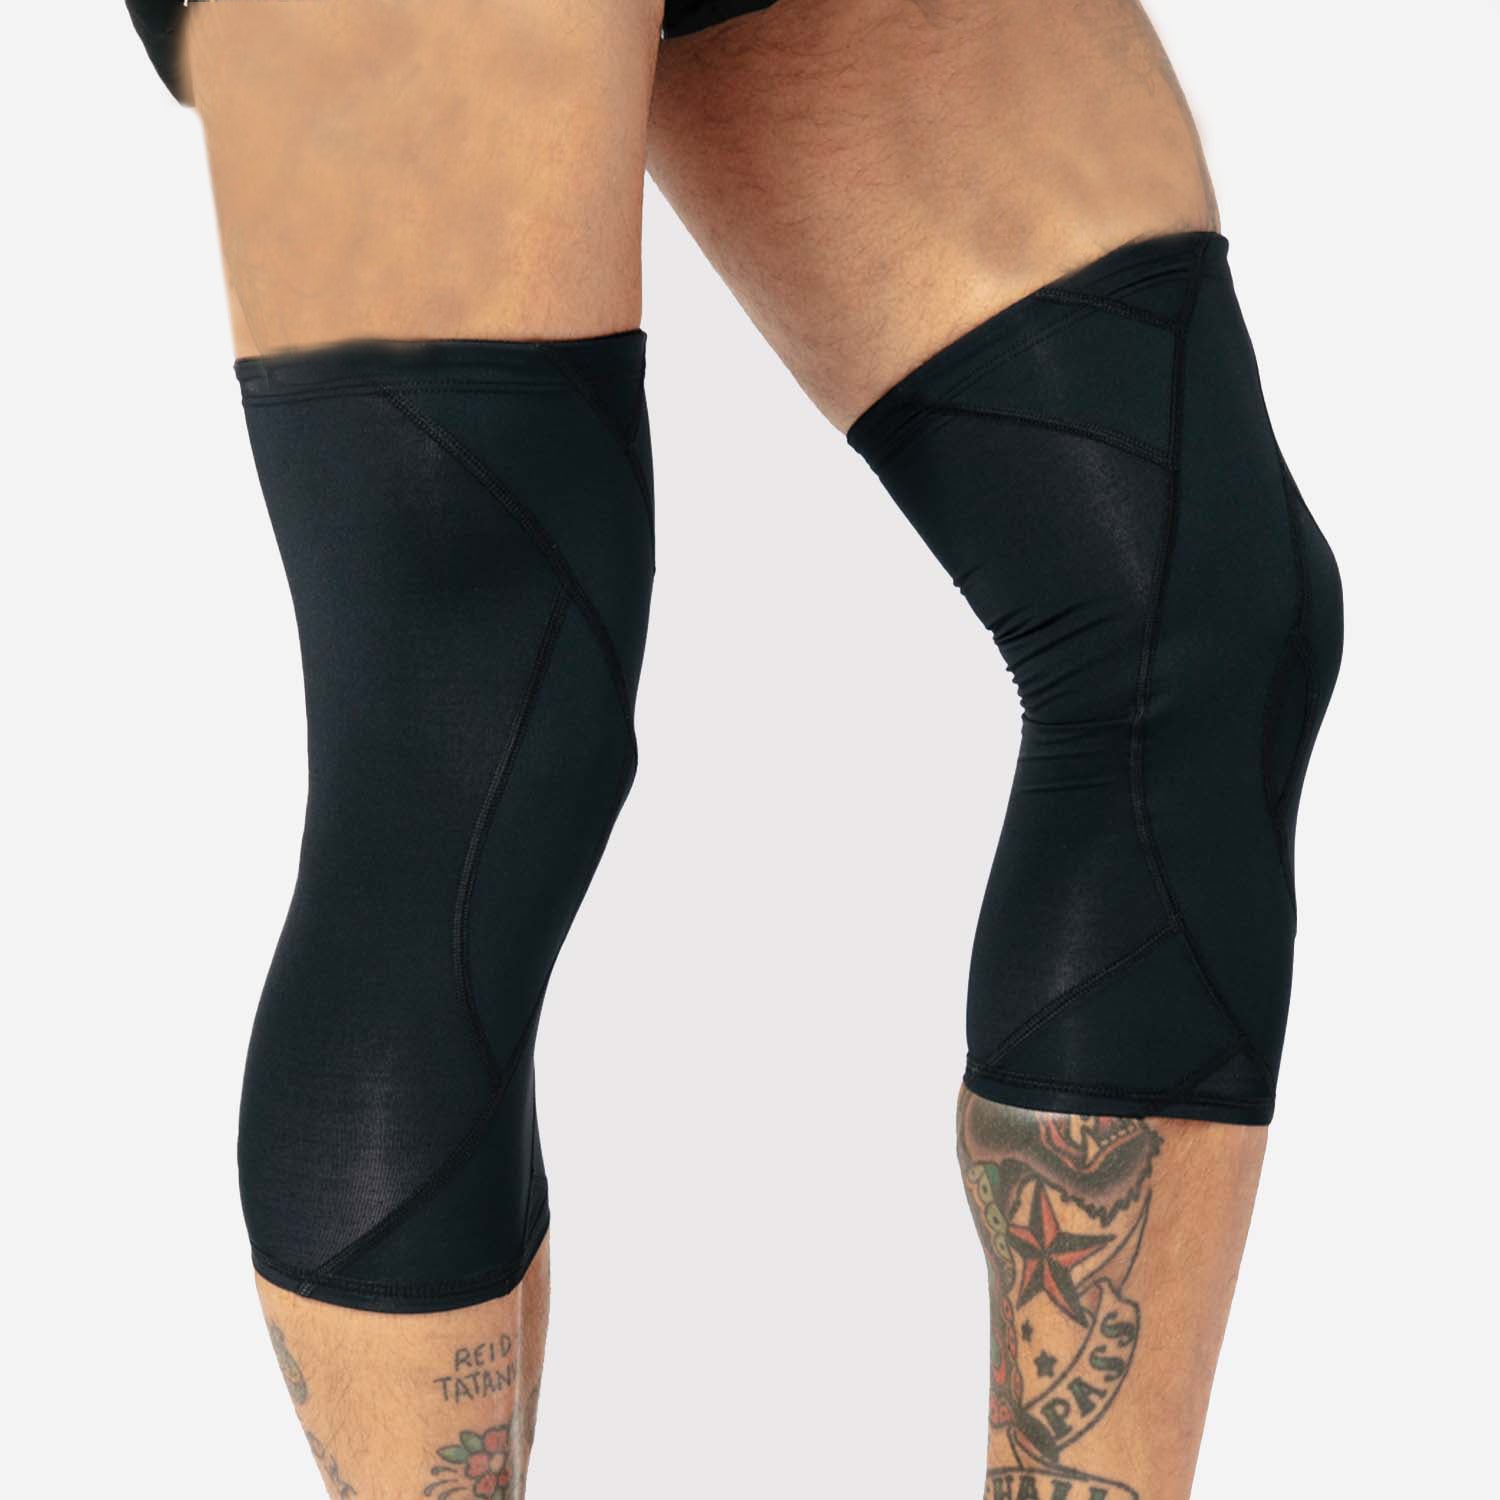 Knee sleeve - All medical device manufacturers - Page 2